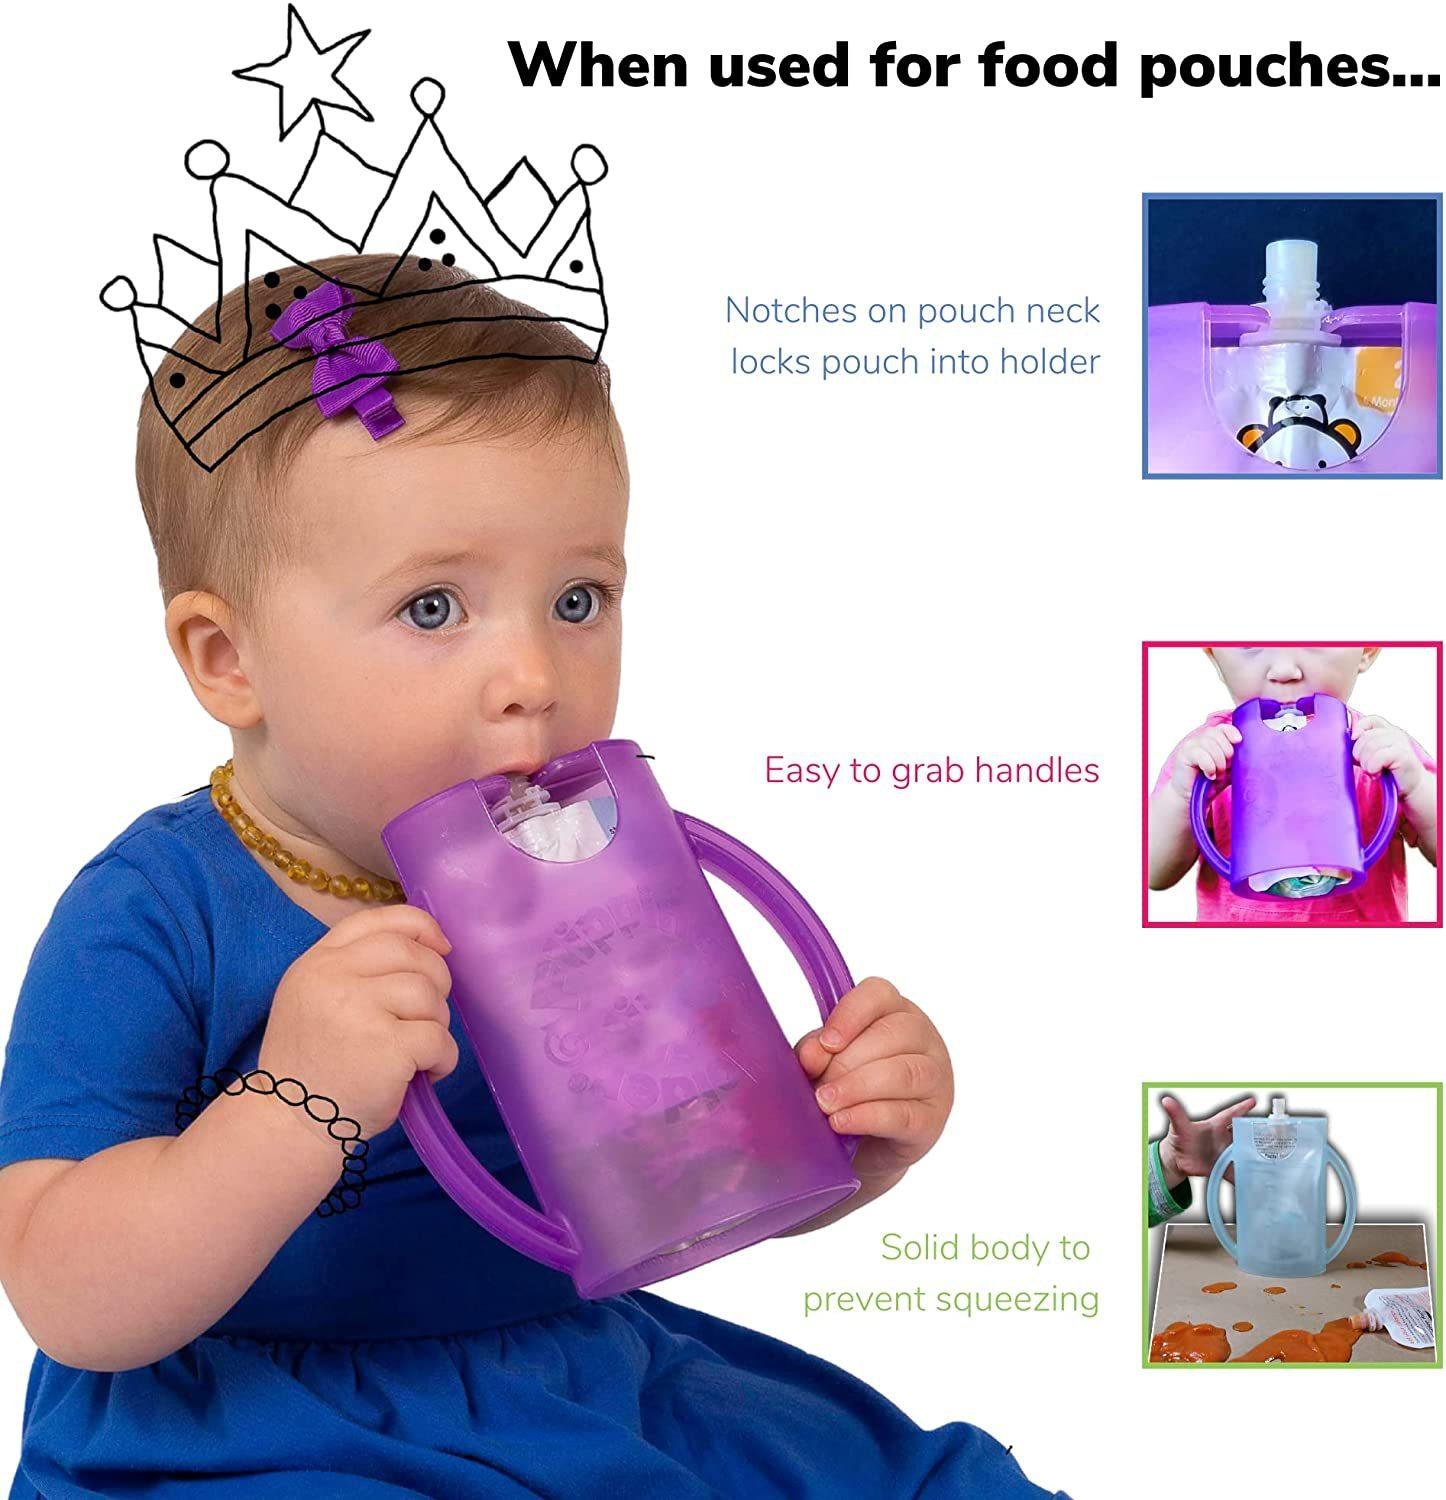 Squeeze Proof Flipping Holder for Food Pouches & Juice Boxes 4